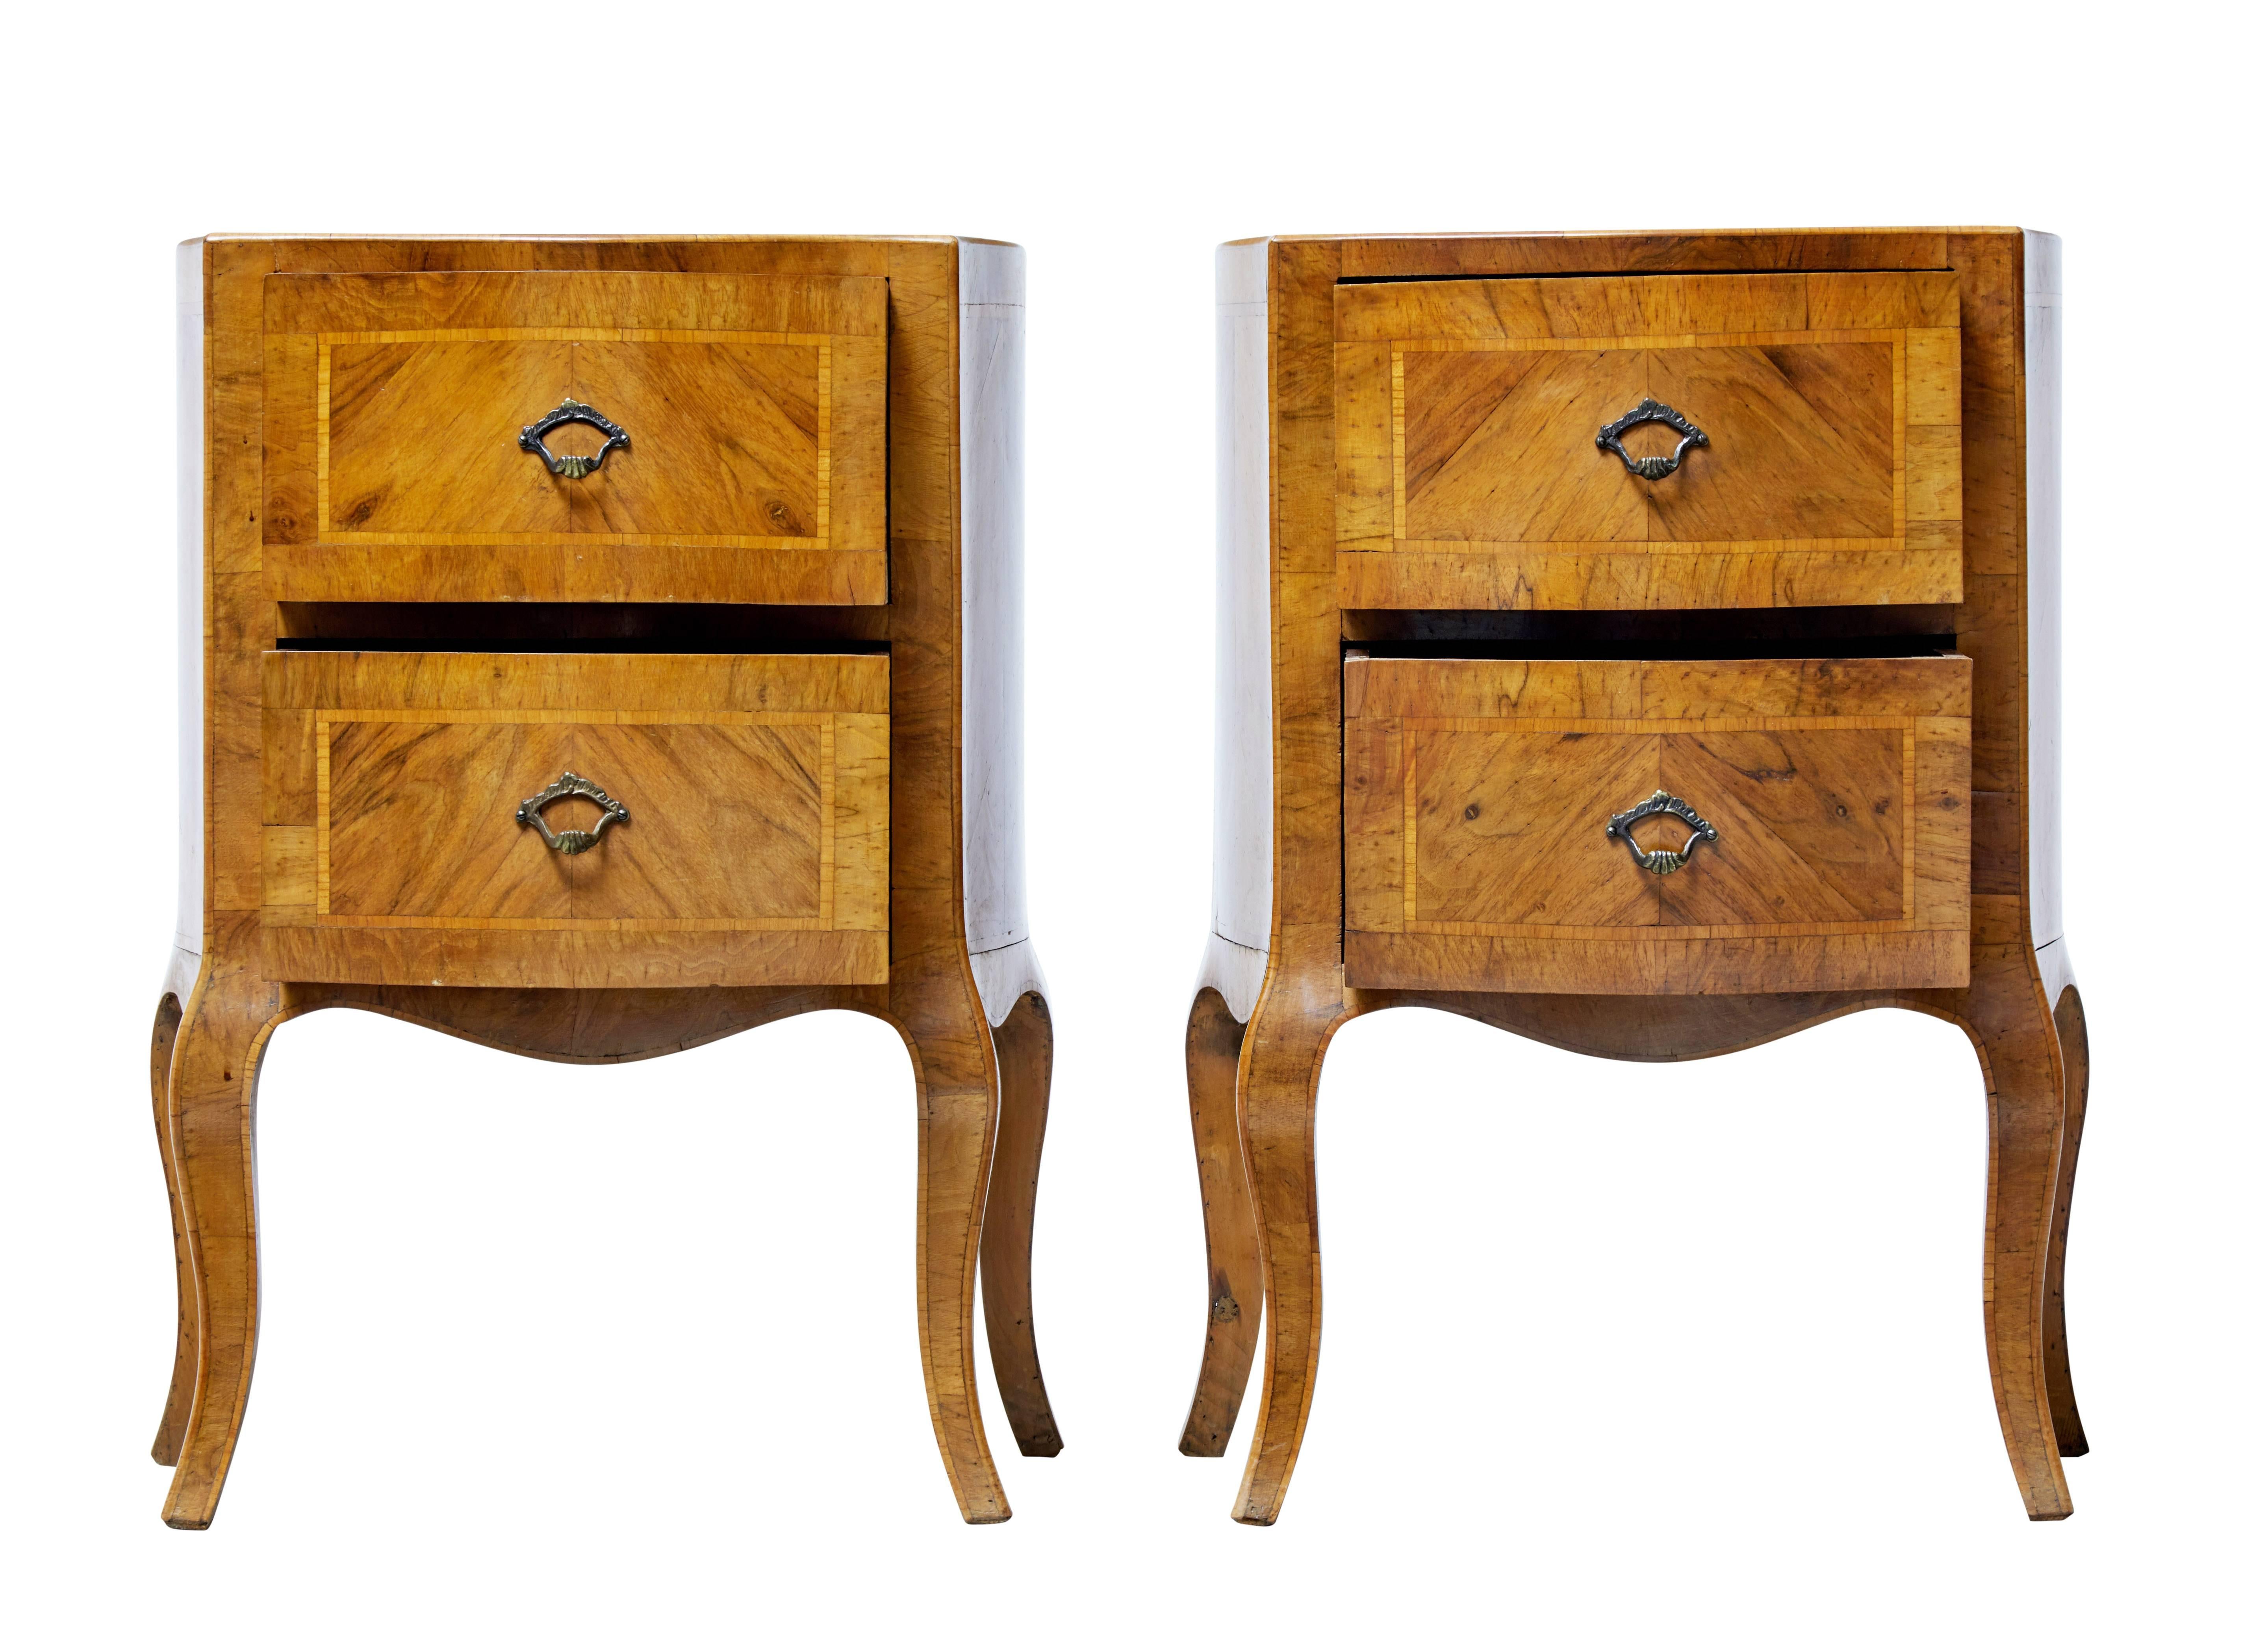 Fine pair of small Maltese walnut chest of drawers, circa 1890.

Two drawers with single handle. Veneered in walnut with satinwood stringing.

Ideal for use as a pair of bedside tables.

Each standing on four sabre legs.

Minor expected